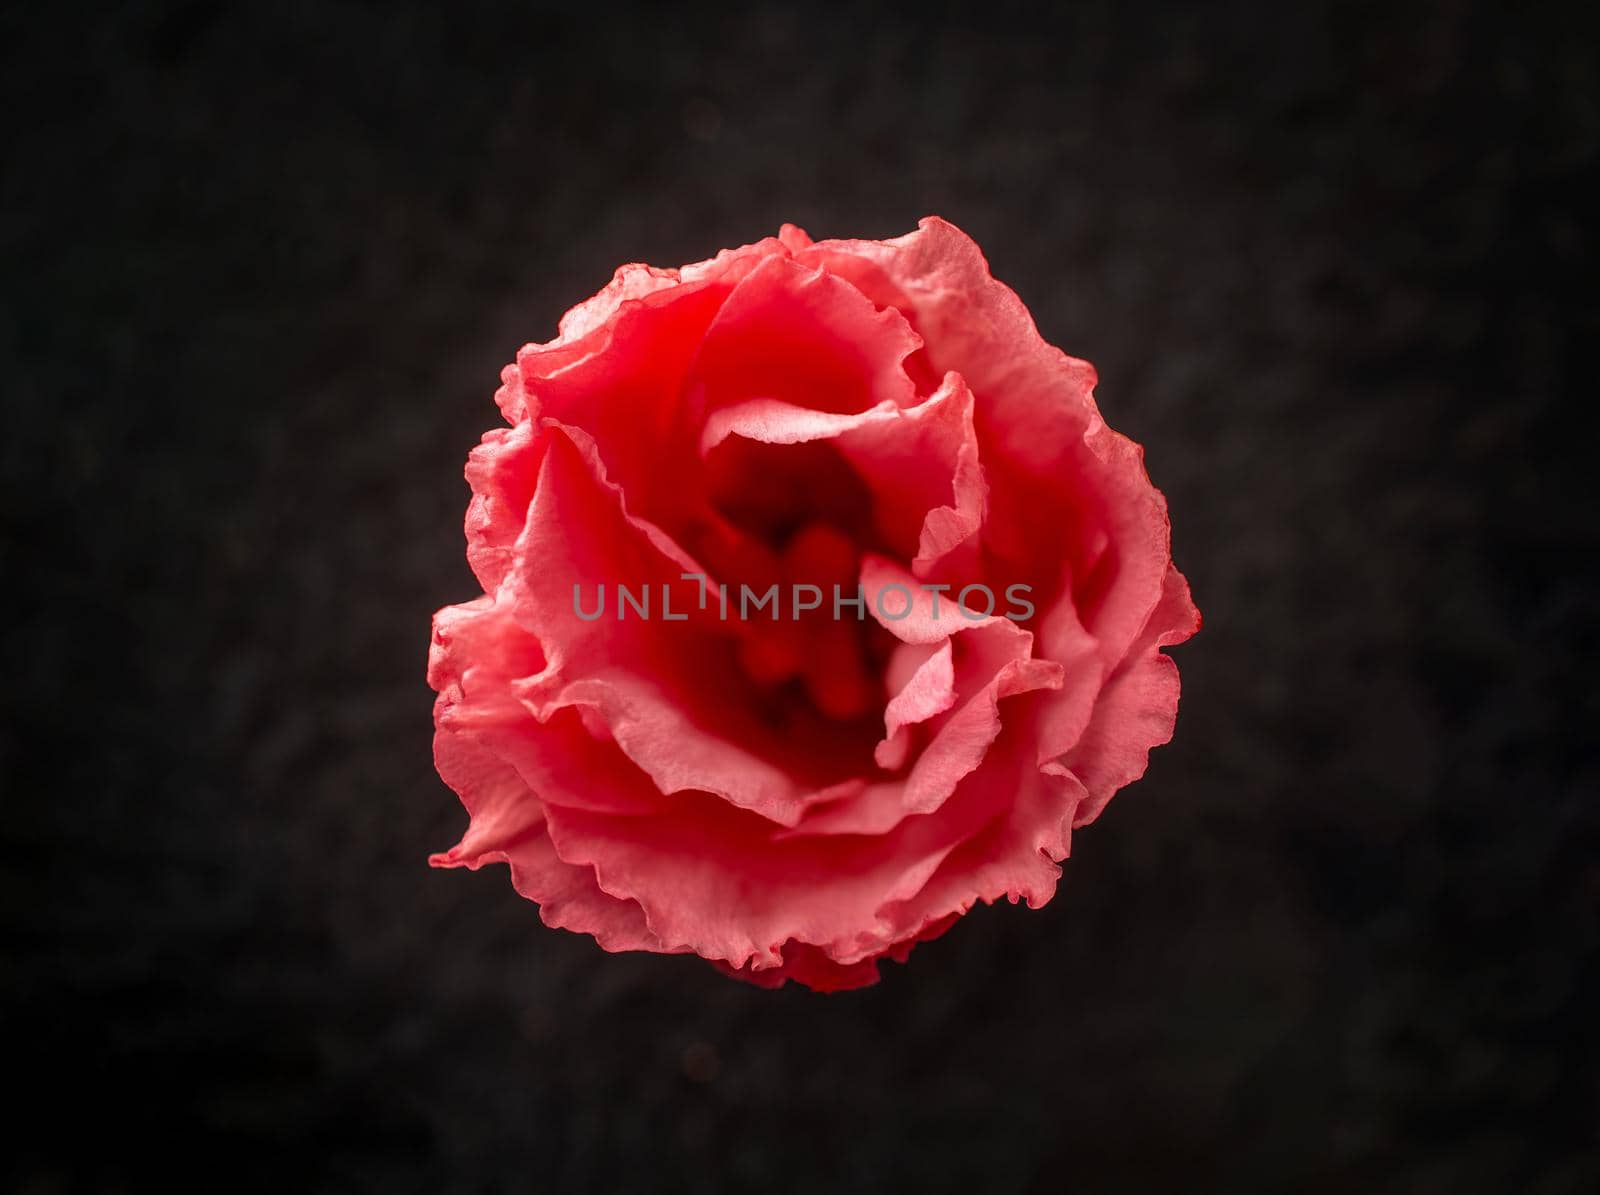 Top view of a flower on black background. Studio shot.